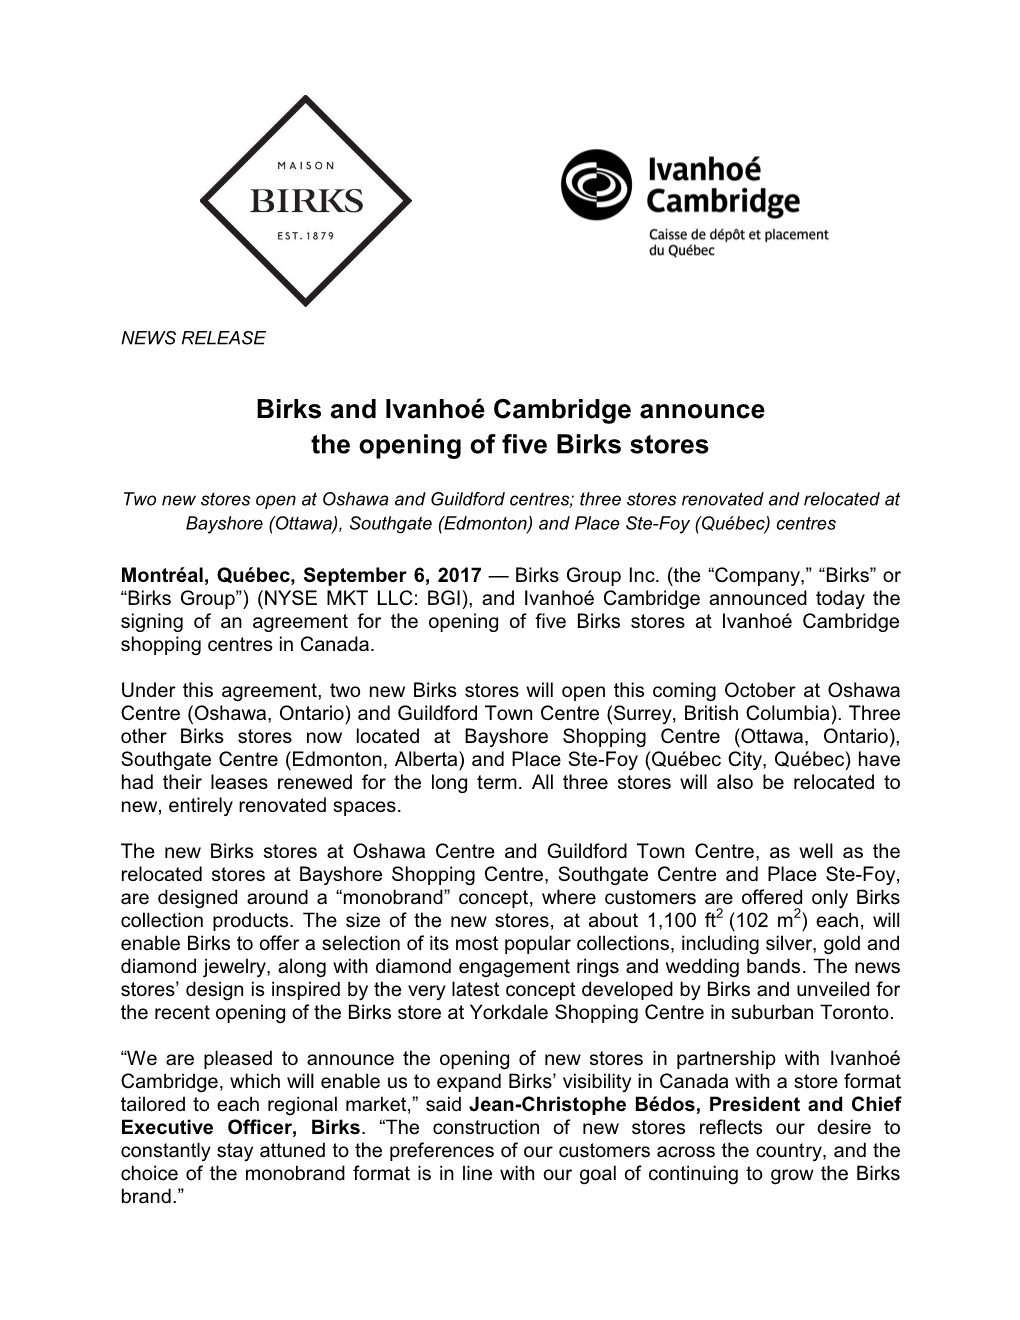 Birks and Ivanhoé Cambridge Announce the Opening of Five Birks Stores